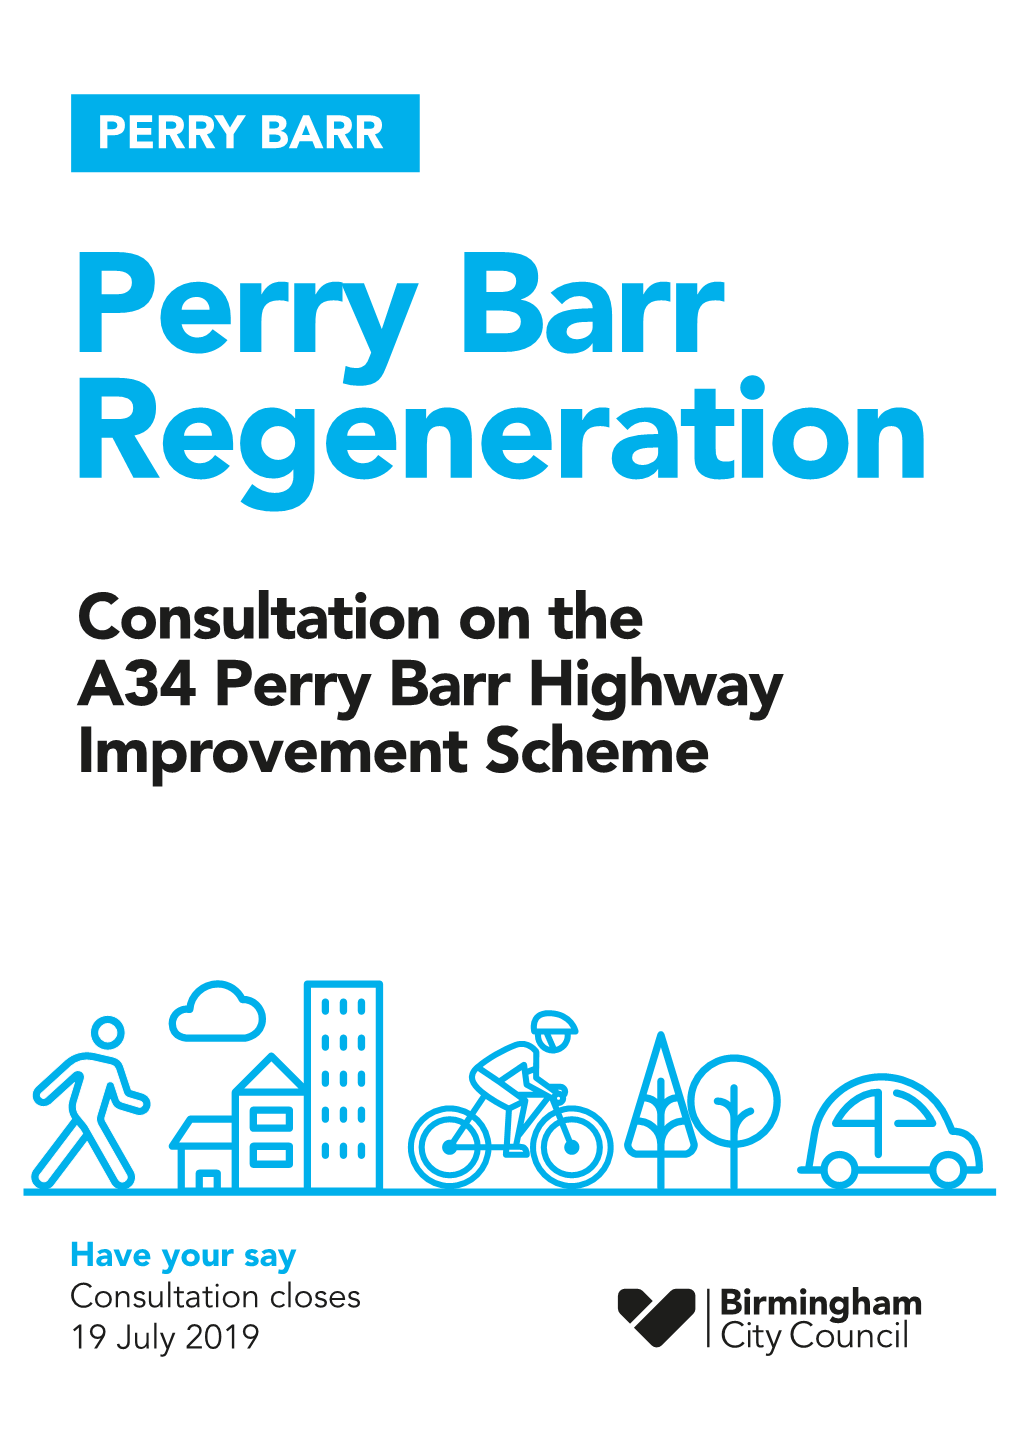 Perry Barr Regeneration Consultation on the A34 Perry Barr Highway Improvement Scheme